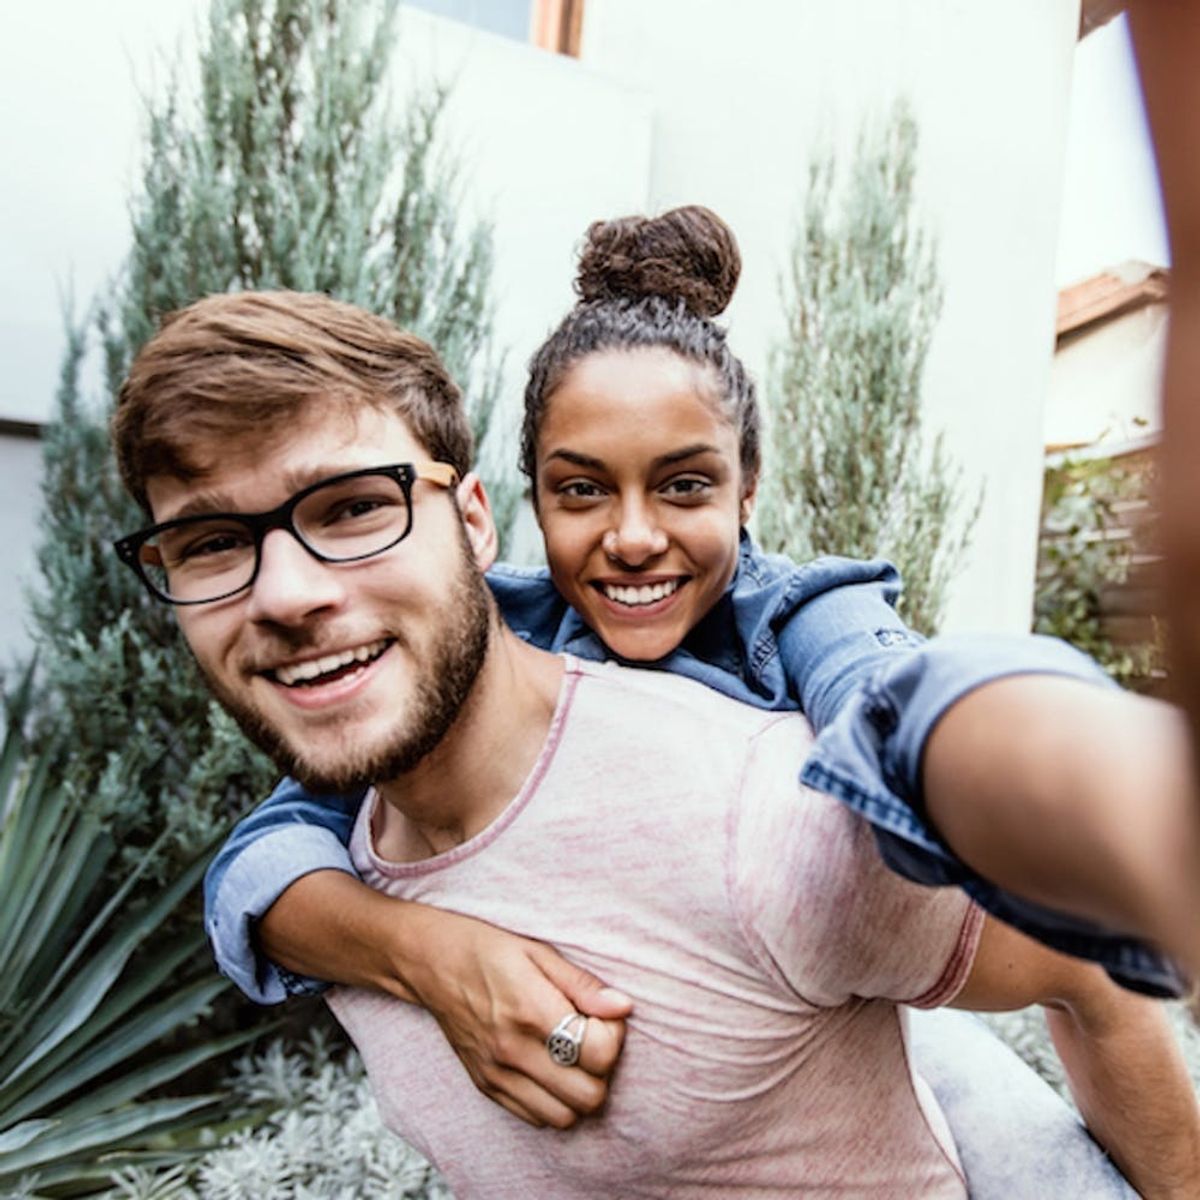 This Is Why Millennials Have the Happiest Relationships